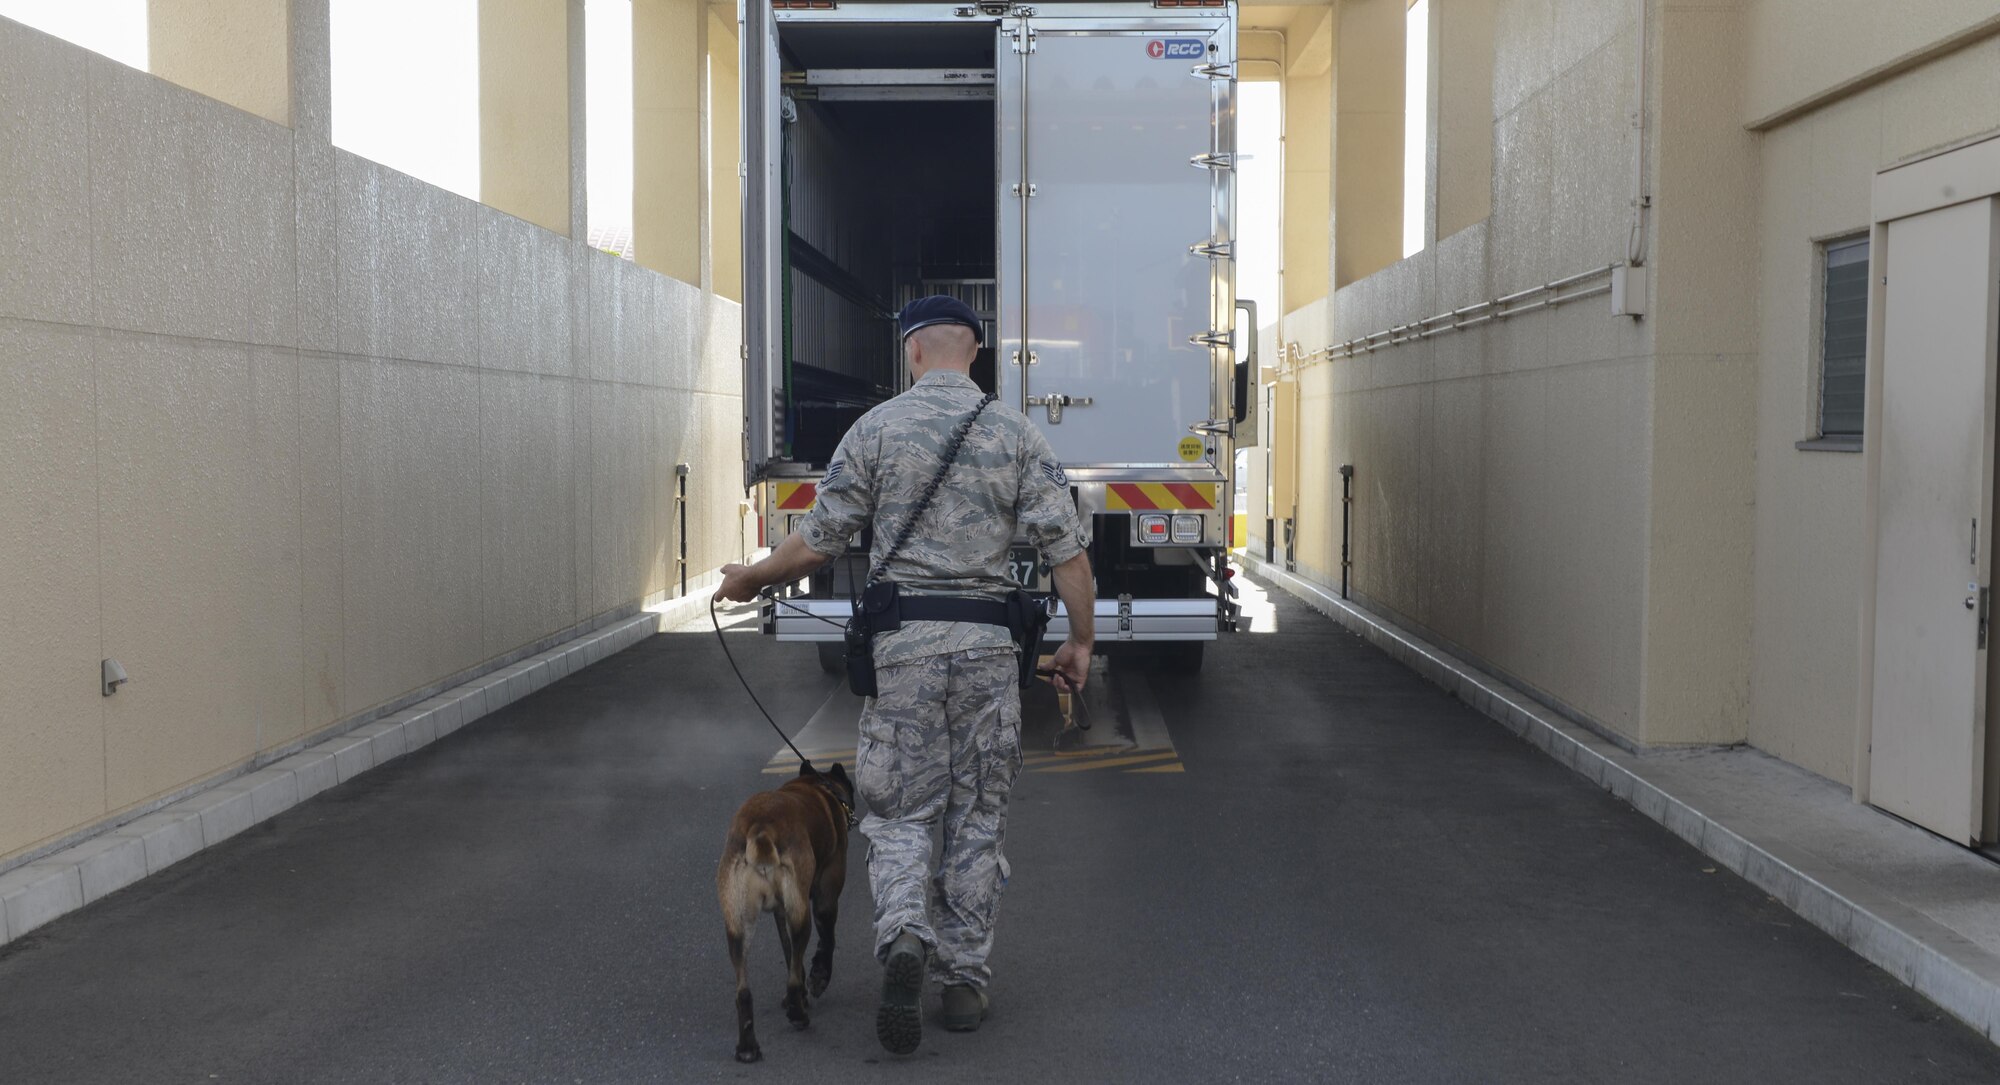 Staff Sgt. Nicholas Galbraith, a 374th Security Forces Squadron military working dog handler, and Topa, a 374 SFS MWD, perform security checks at Yokota Air Base, Japan, July 24, 2015. Topa is Galbraith's first canine partner outside of training, and they have been working together for one year. (U.S. Air Force photo/Airman 1st Class David C. Danford)